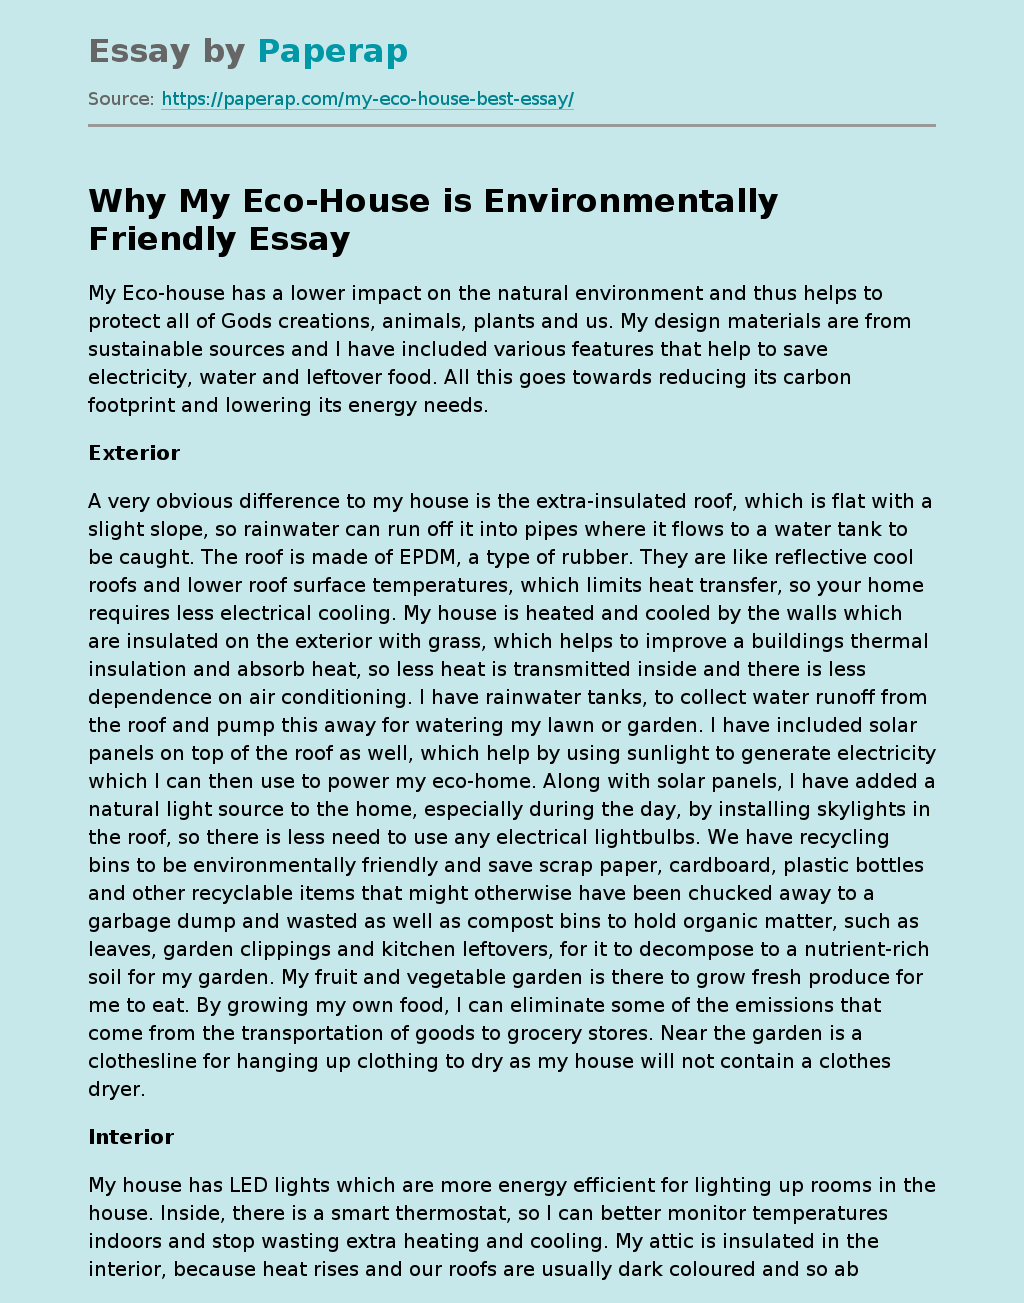 Why My Eco-House is Environmentally Friendly